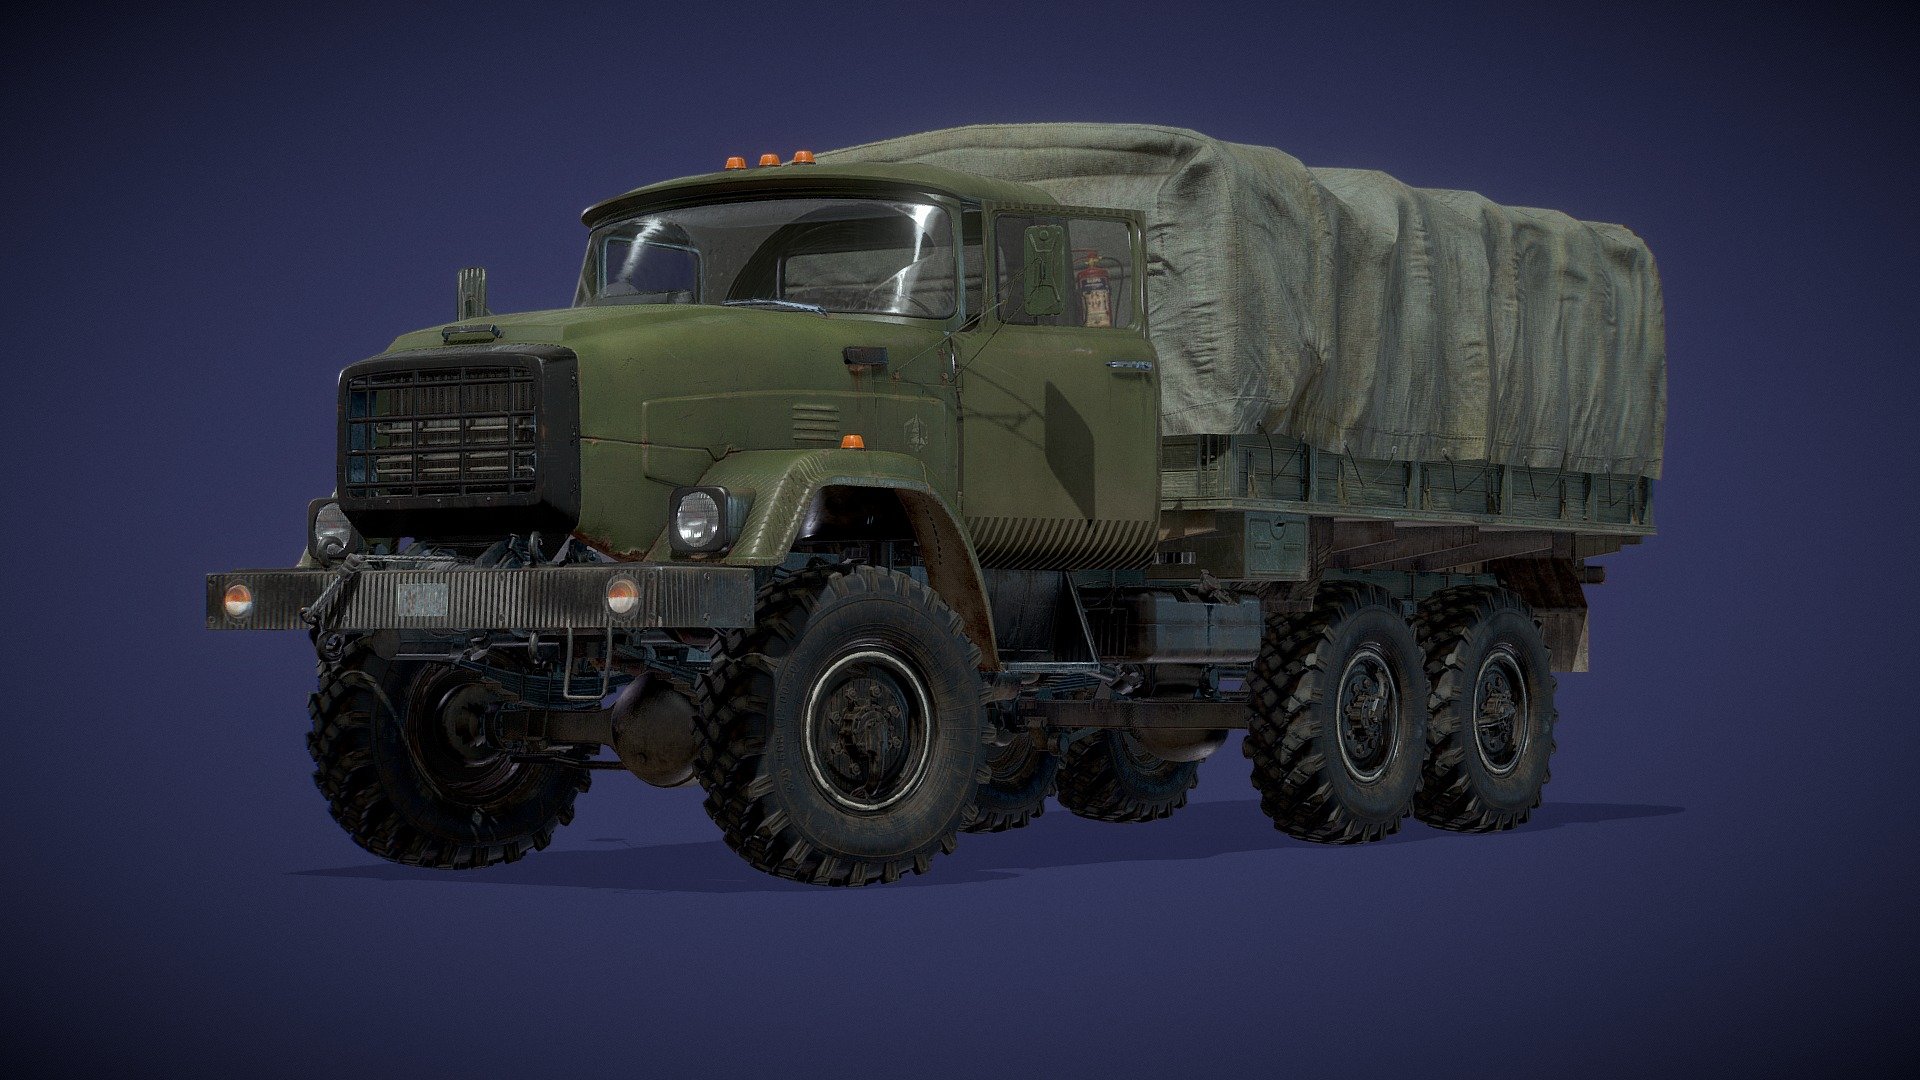 Russian inspired army truck, merging concepts of the famous ZIL-130 and the never-released ZIL-Э133ВЯТ. Made in Blender, sculpted in ZBrush, UVed in Rizom and textured in Substance Painter. Also, a huge shout out to PureRef that doesn't get enough credit. 
Made the cab and interior using high-low baking workflow on top of weighted normals to allow for baking a sculpted HD mesh with dents and scuffs. The rest of the truck is using weighted normals only.

Very good quality interior, making it suitable for 1st person camera.

Game ready although the policount may not be the best for a background enviroment prop (unless you're using Nanite).

The .blend file is included with the truck in its neutral possition, the tires undeformed, high res tga textures and this cargobay https://skfb.ly/ouZVo. It is organized in collections containing the different truck parts to allow for easier creation and export of new interchangeable parts like Bumpers, Frame addons, tires, etc.

https://www.artstation.com/artwork/B1Ay88 - DCB K-133BYAT (Unbranded) with tarp - Buy Royalty Free 3D model by Axel Roman (@DeathCoreBoy1) 3d model